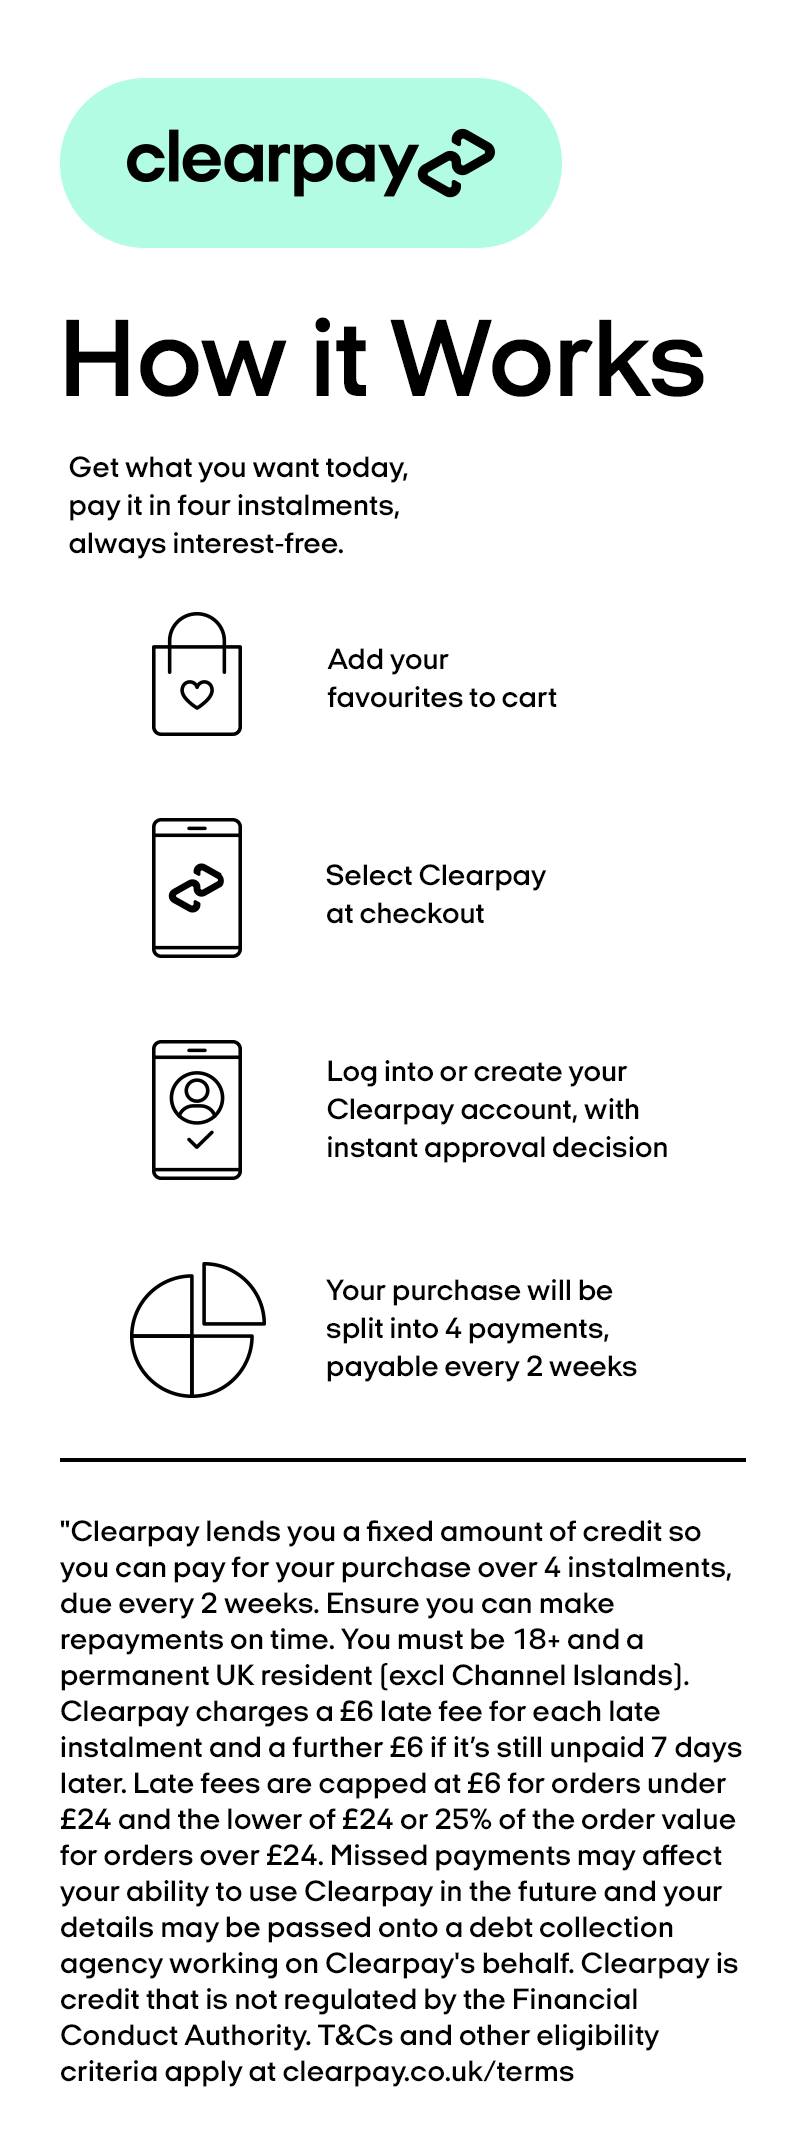 Clearpay<br>how it works<br>Shop now. Pay Later. Always interest-free.<br>Add your favourites to cart. Select Clearpay at checkout. Log into or create your Clearpay account, instant approval decision. Your purchase will be spilt into 4 payments, payable every 2 weeks.